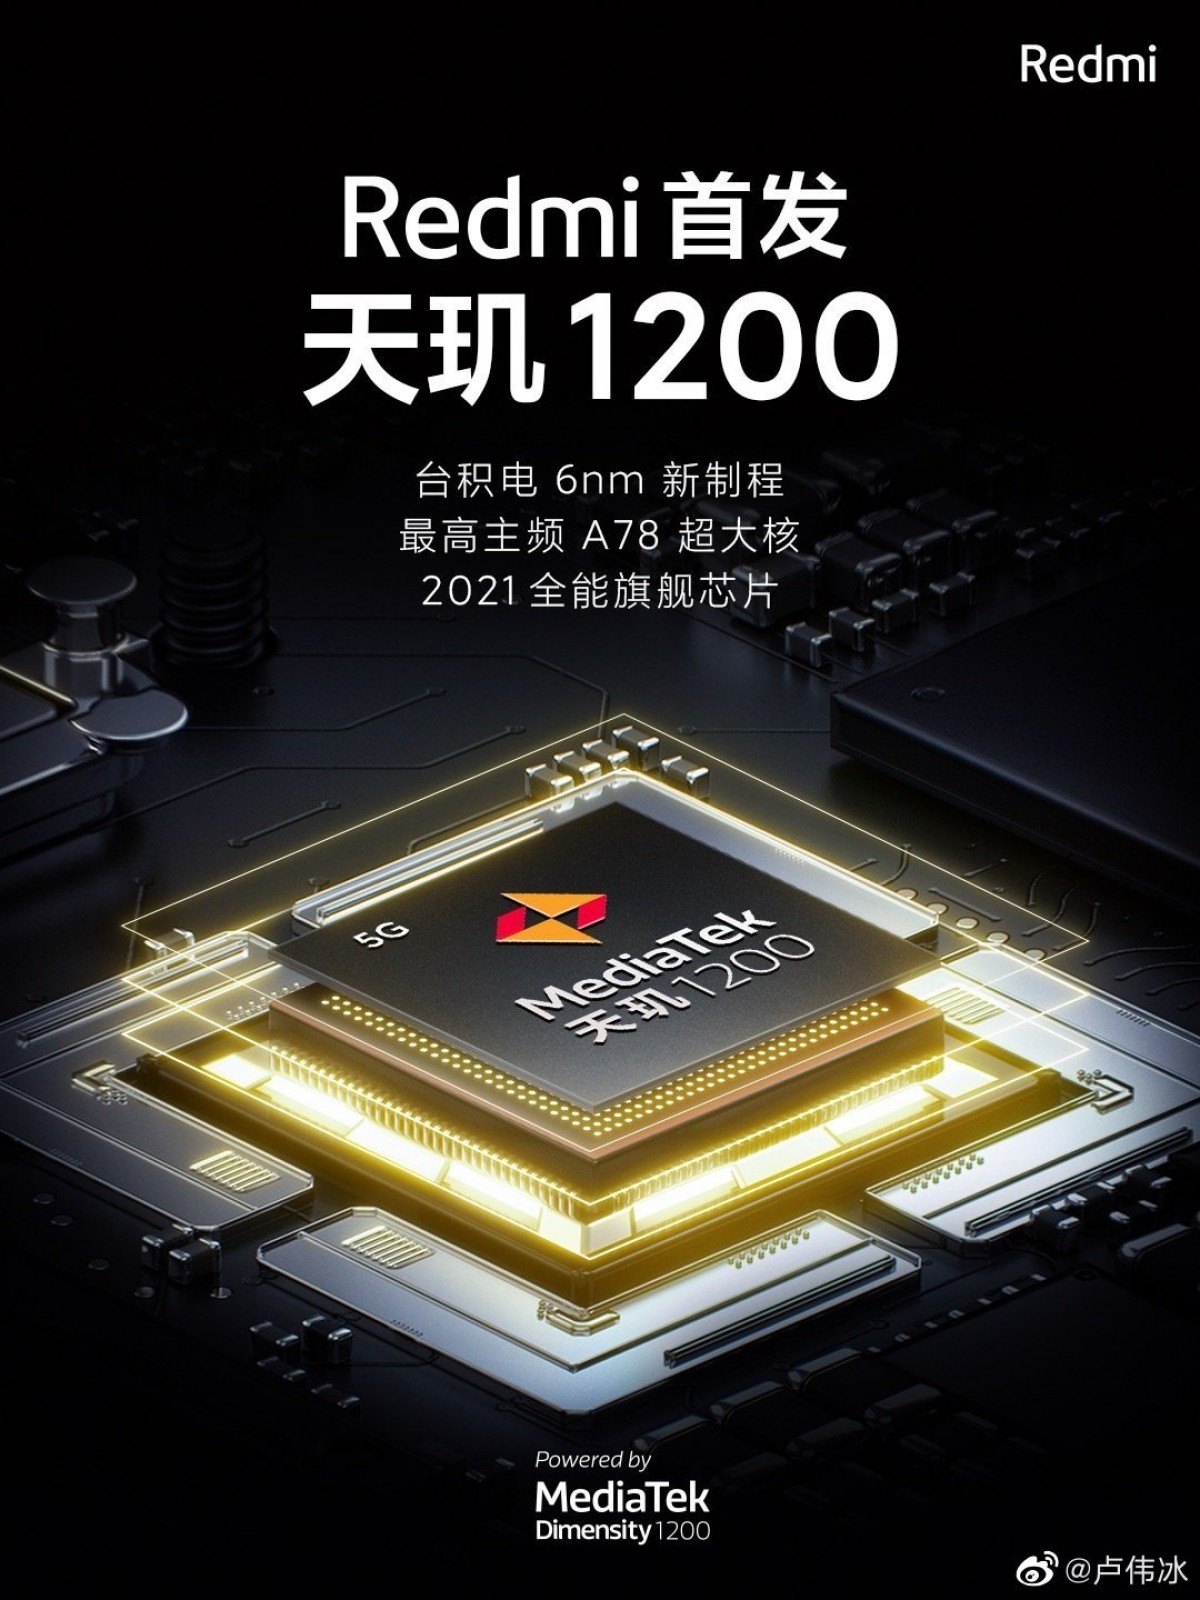 Redmi pledges allegiance to Dimensity 1200, promises a gaming phone in 2021